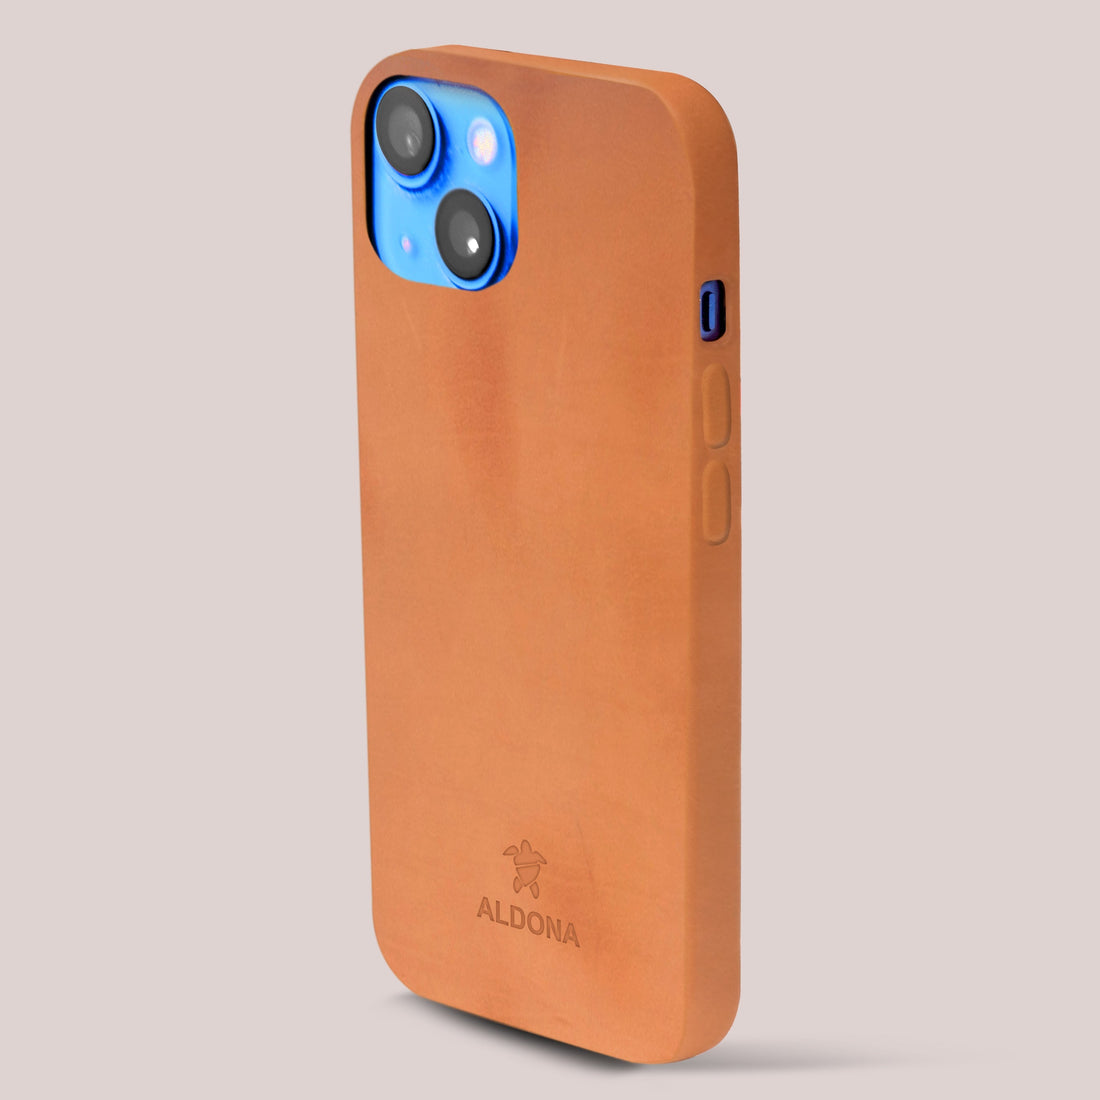 Kalon Case for iPhone 13 Pro with MagSafe Compatibility - Vintage Tan